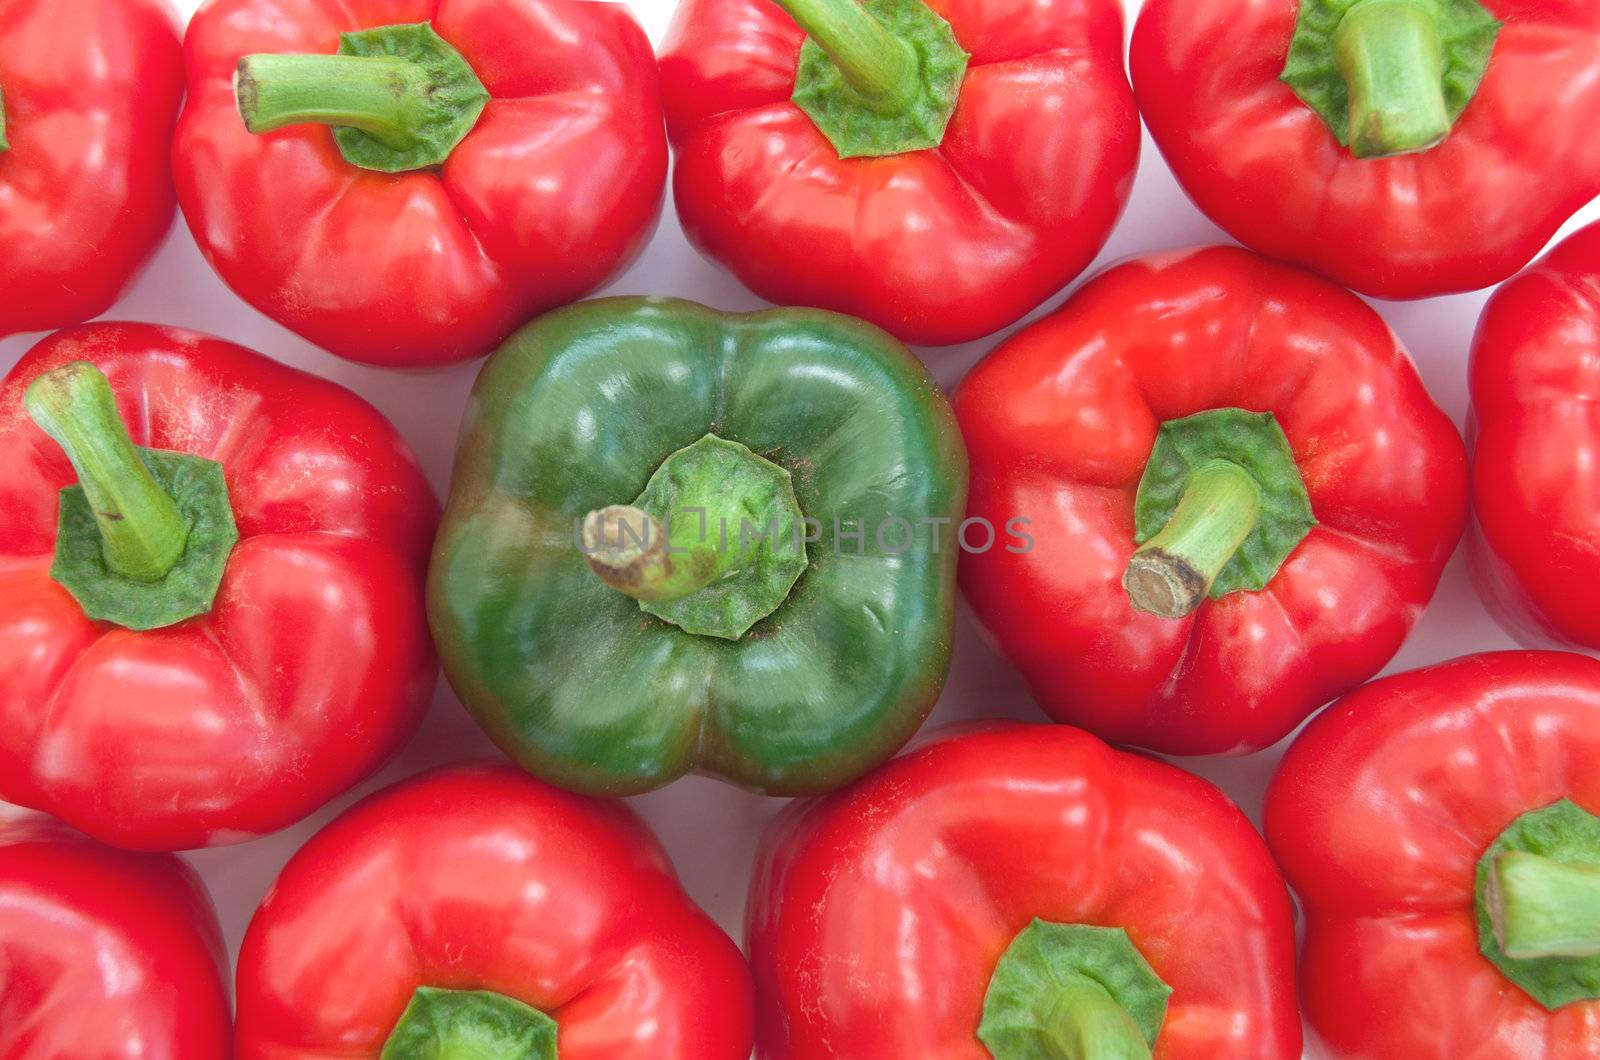 Green amongst many red peppers